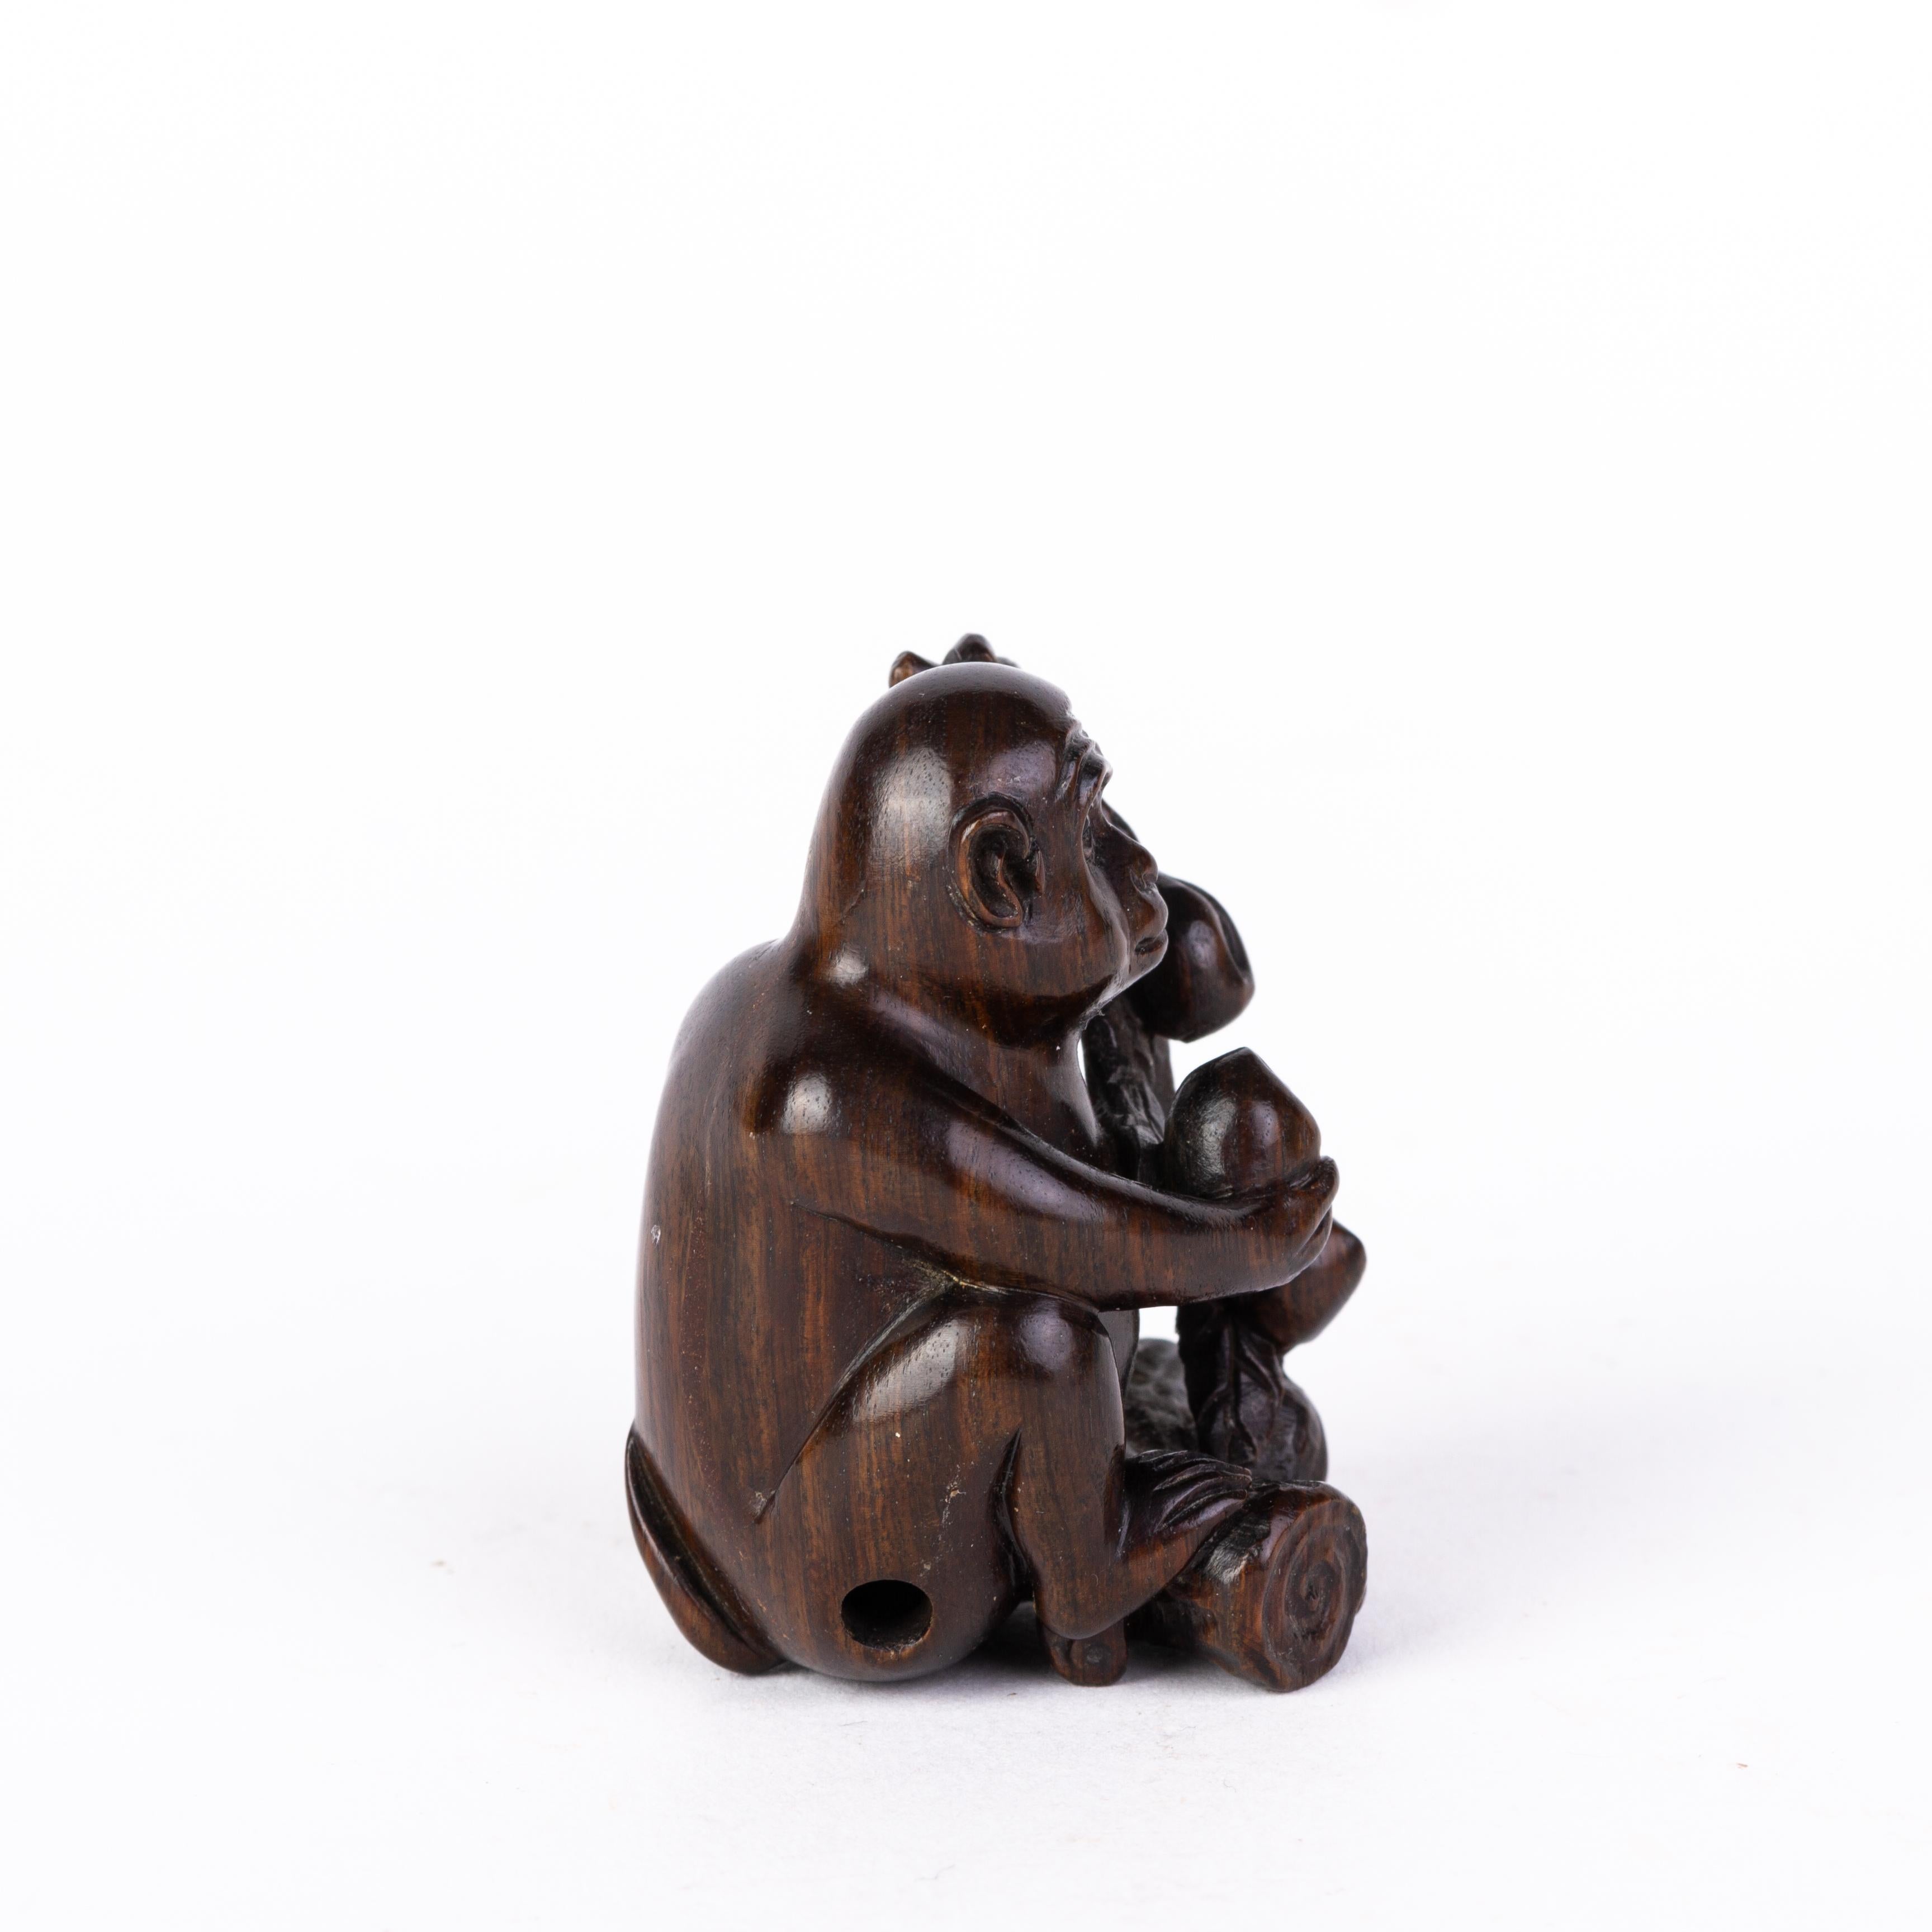 Signed Japanese Carved Boxwood Monkey Netsuke Inro Ojime
Very good condition.
From a private collection.
Free international shipping.